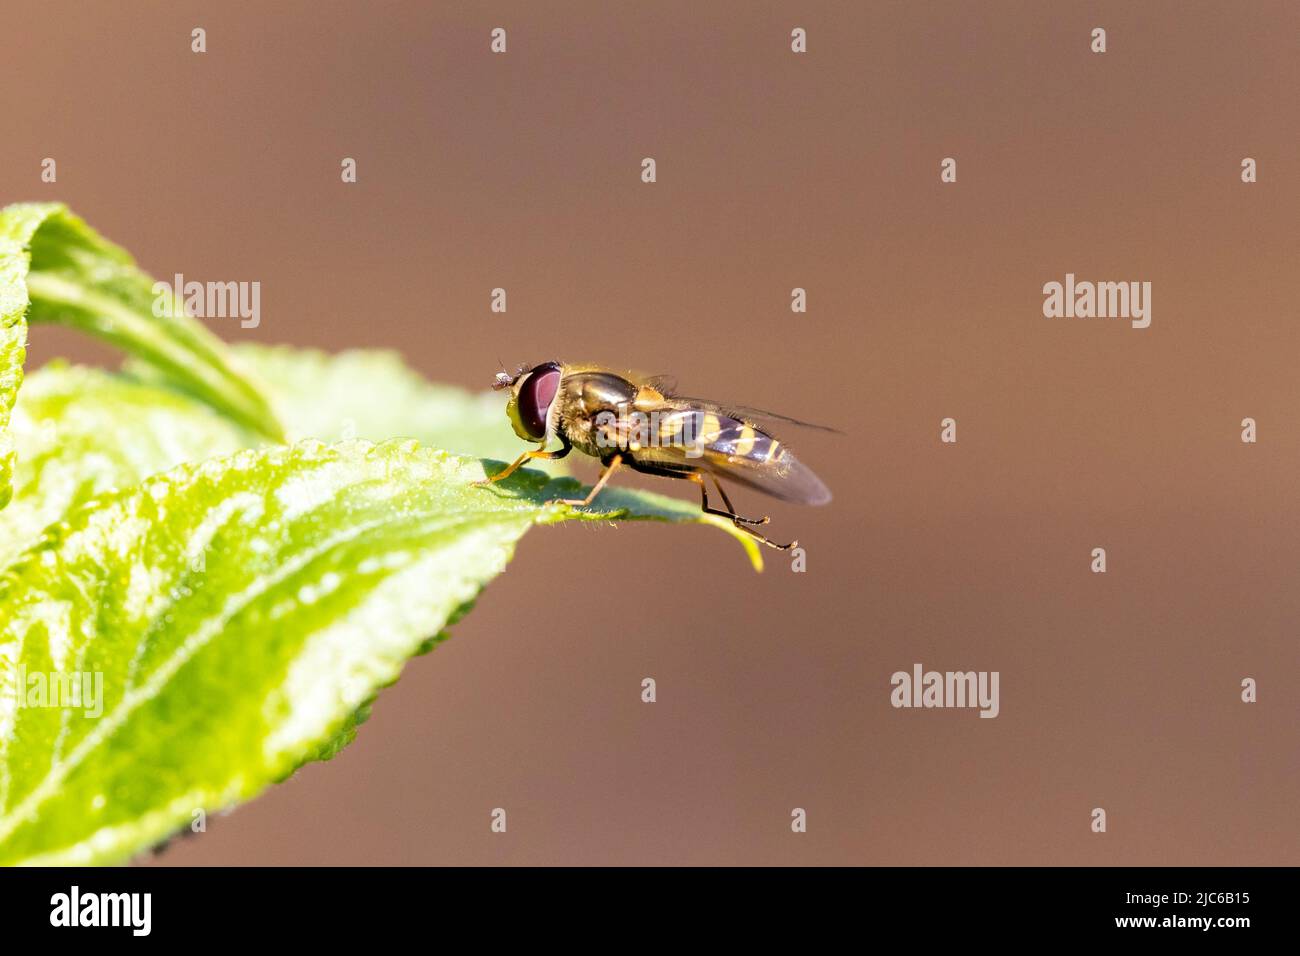 A portrait of a epistrophe grossulariae or syrphus hoverfly. The insect is sitting on a green leaf in direct sunlight in a garden. Stock Photo